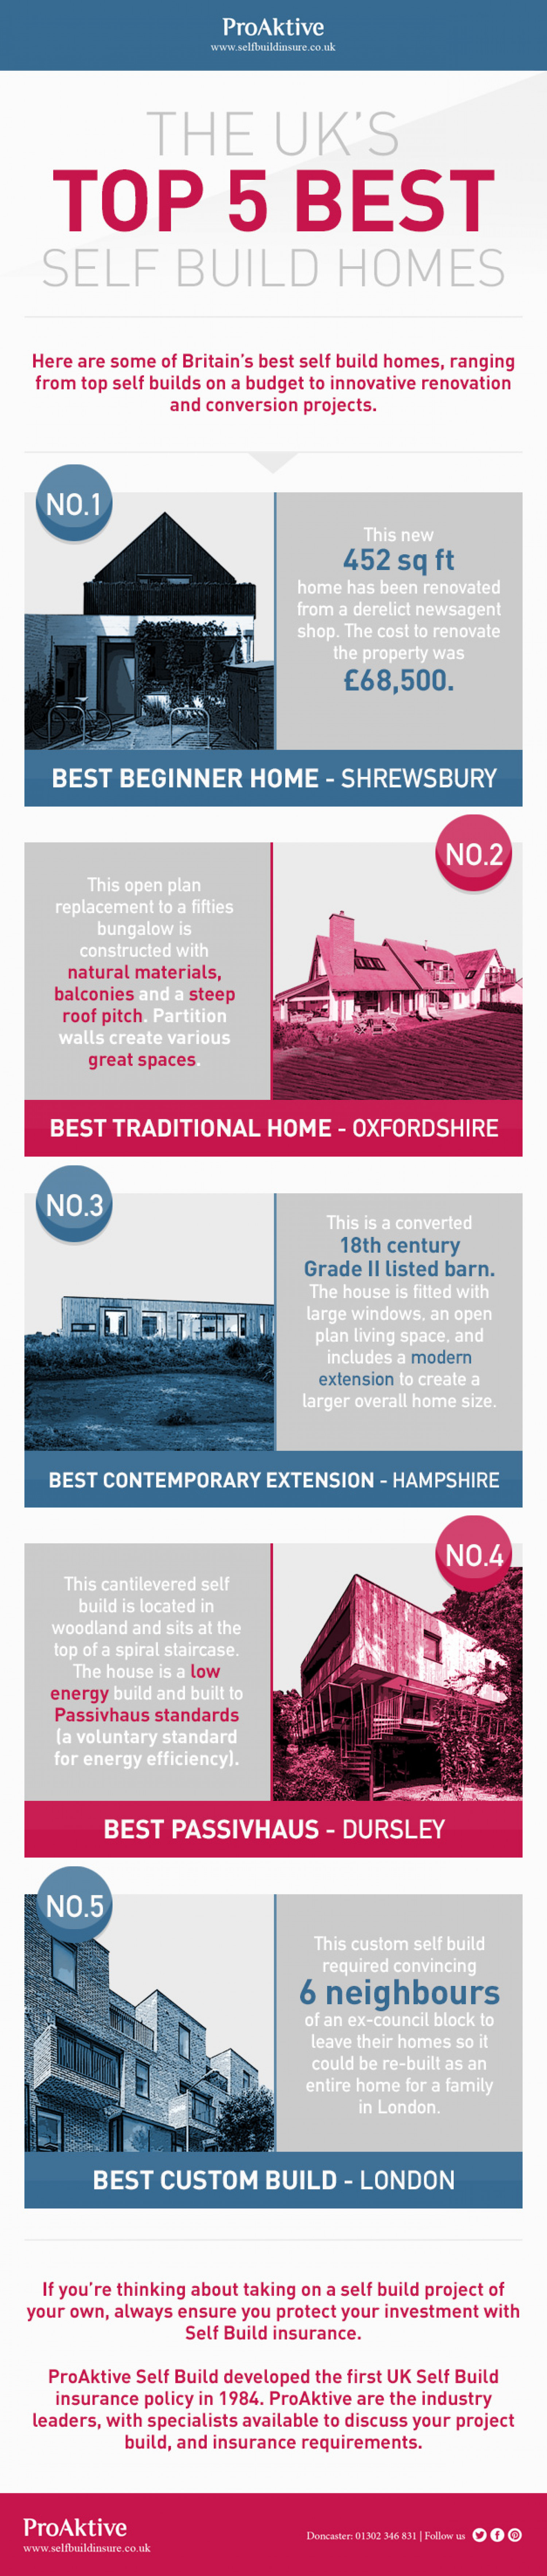 The UK's Top 5 Best Self Build Homes Infographic